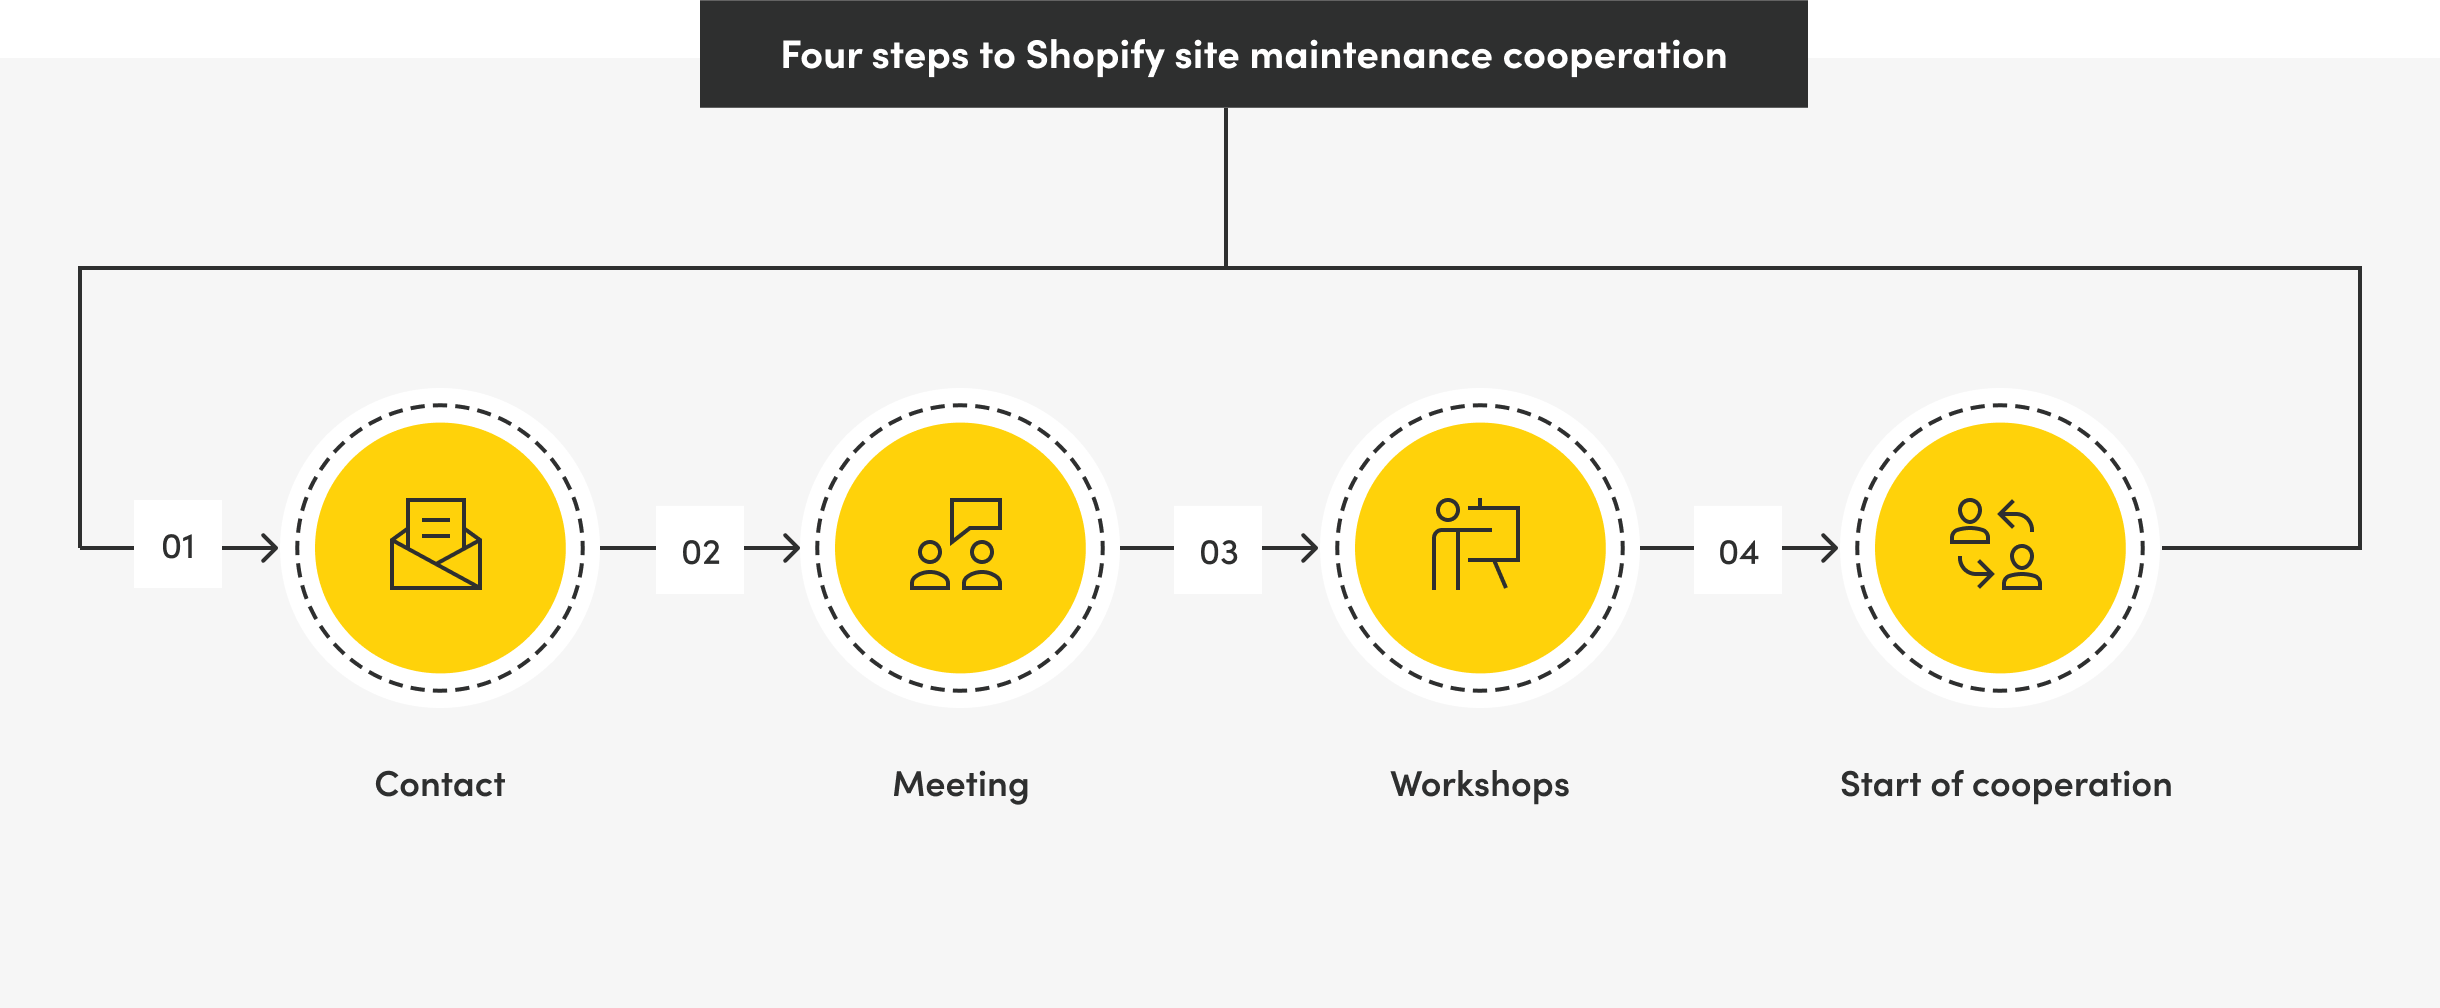 An infographic depicting four steps to Shopify site maintenance cooperation